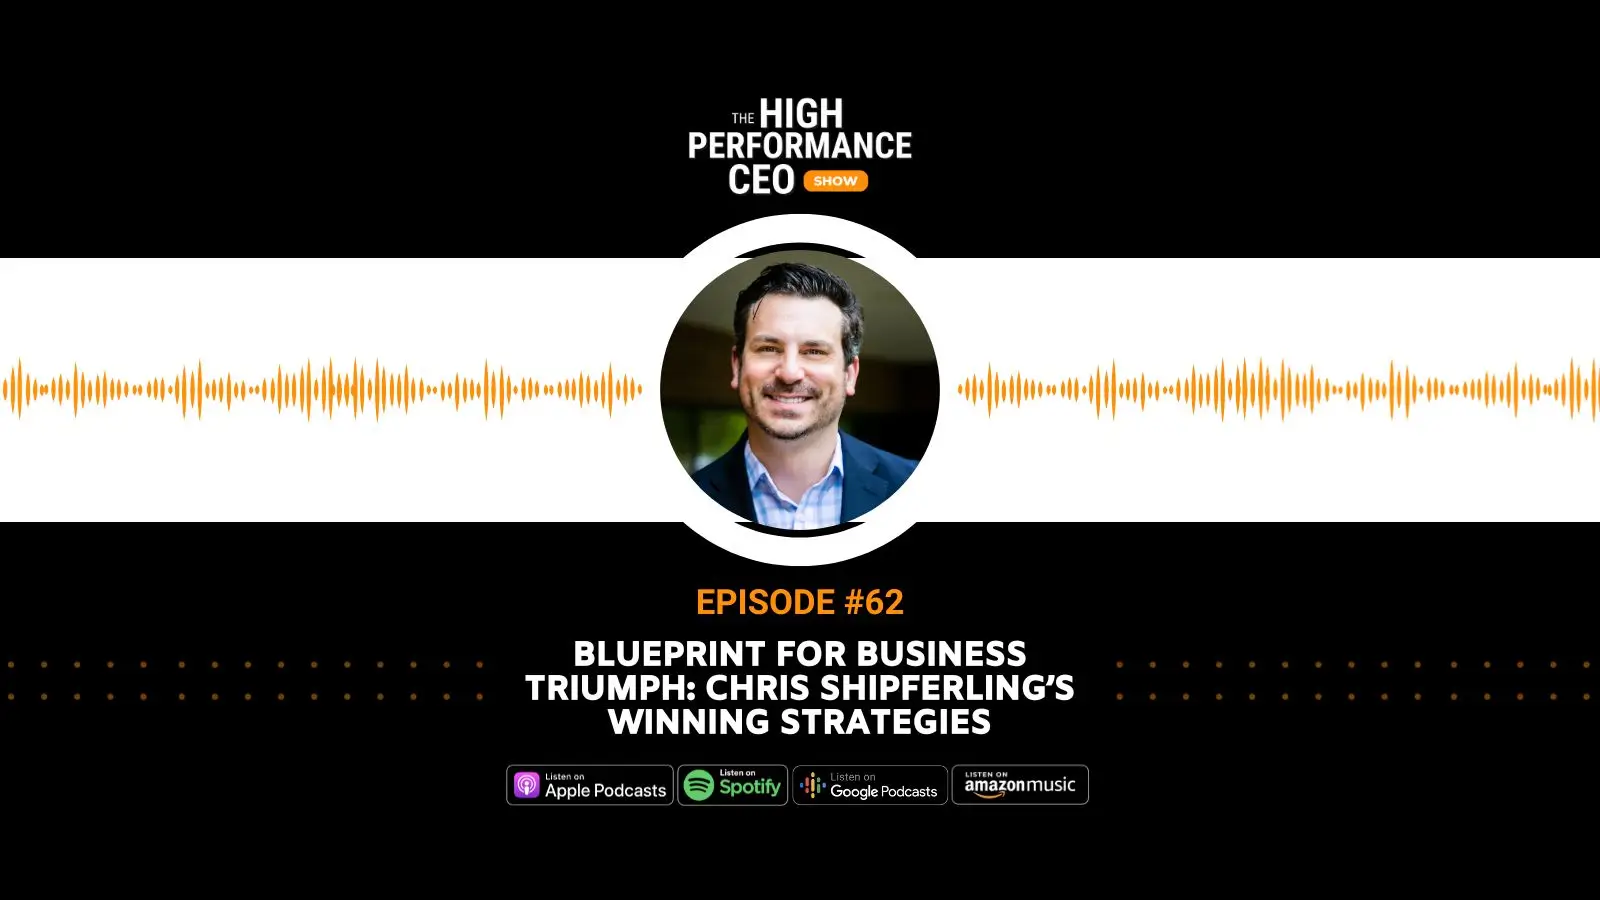 Blueprint for Business Triumph: Winning Strategies with Chris, Ep. 62